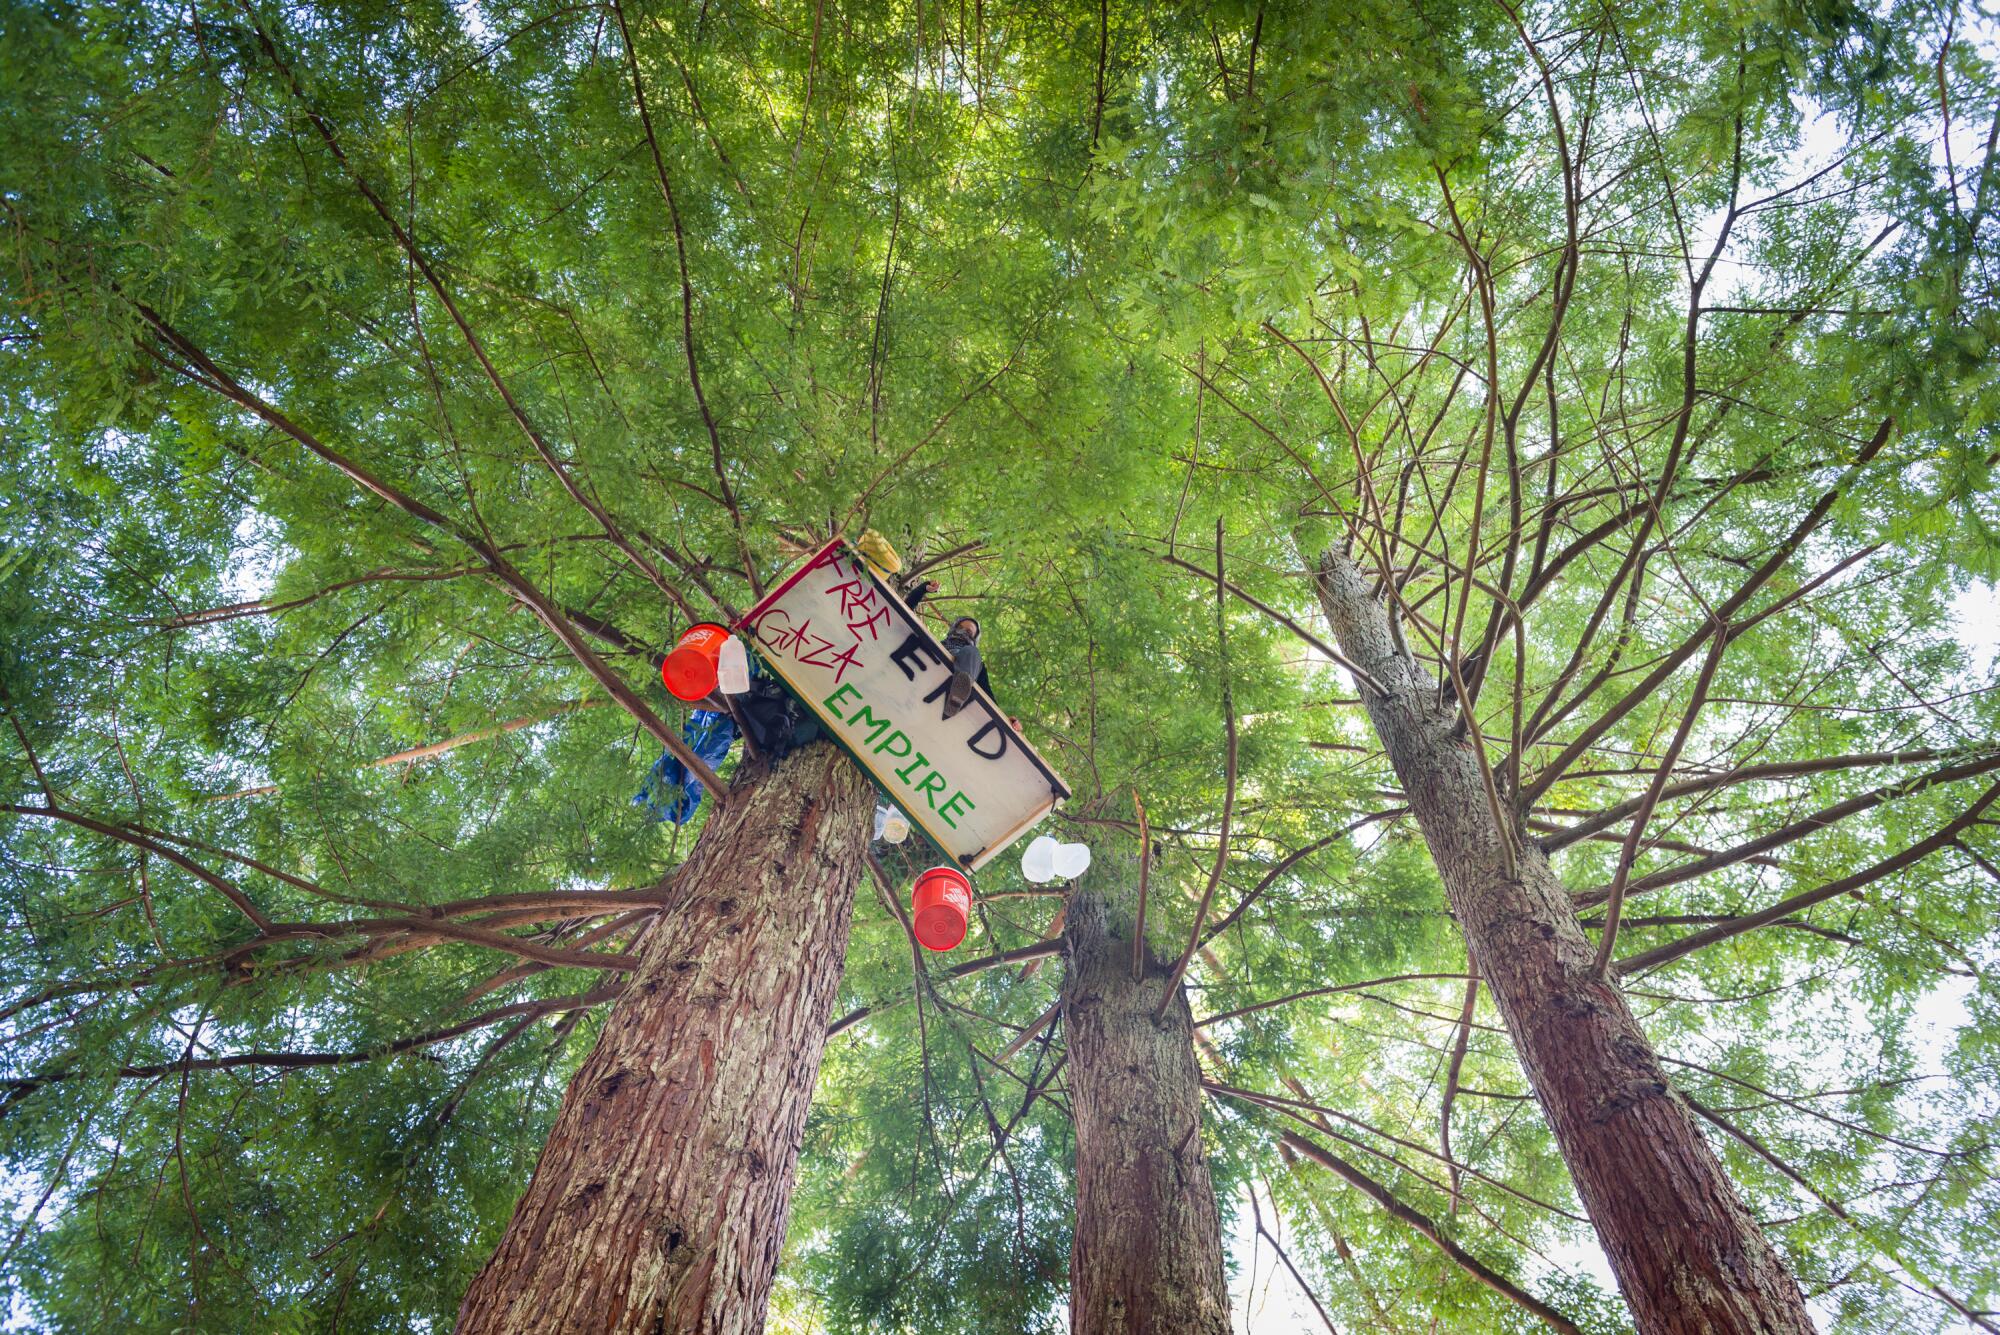 A student in a tree holds a sign reading "Free Gaza End Empire."